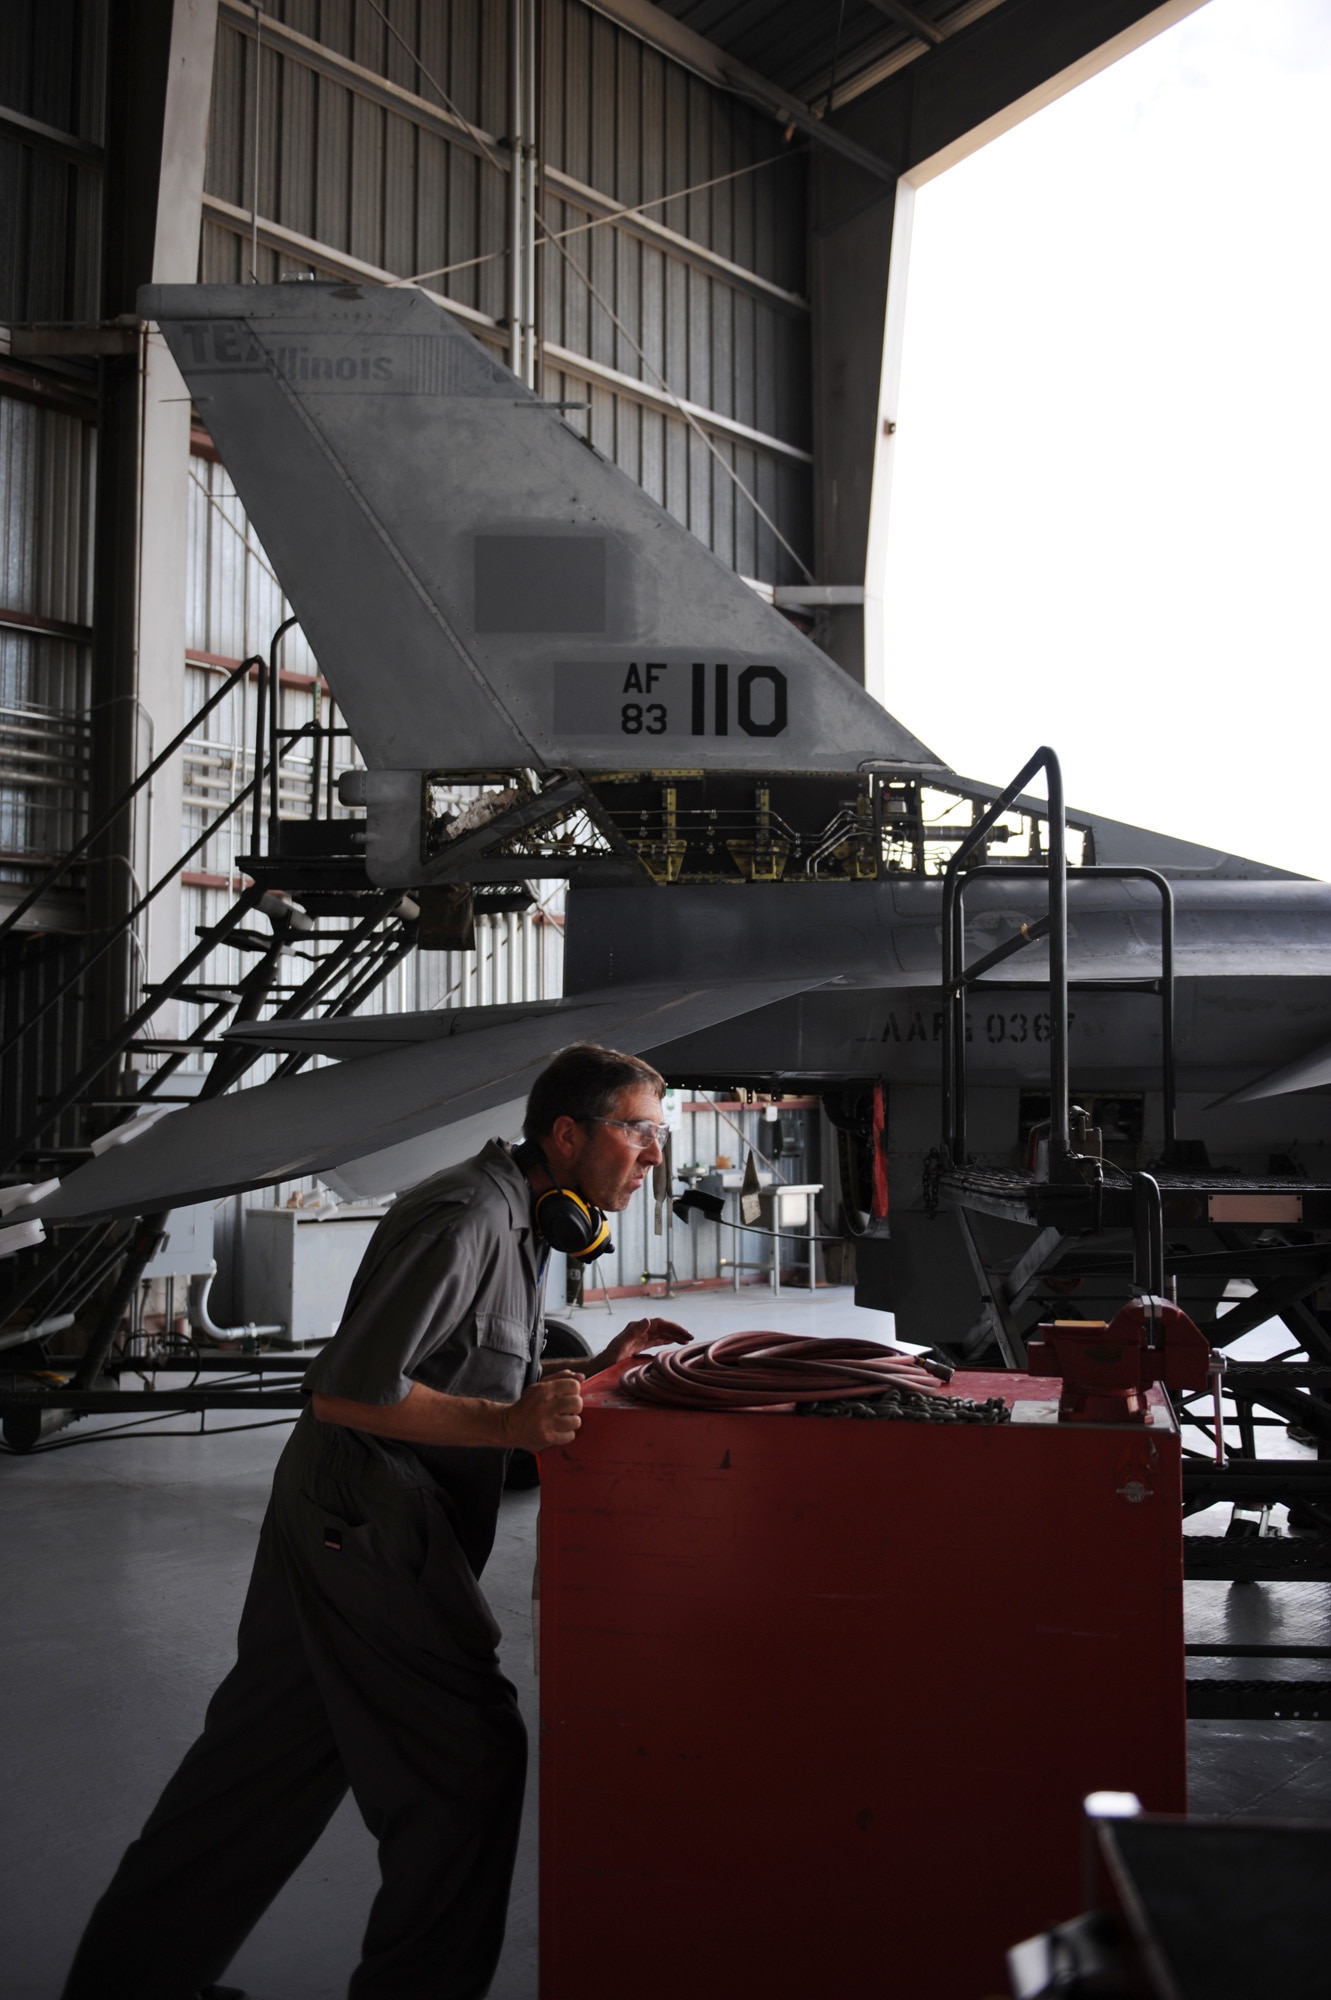 Garth Chitty pushes a toolbox to work on an F-16 Fighting Falcon July 30, 2010, at Davis-Monthan Air Force Base, Ariz. F-16s are being converted into usable manned or drone targets allowing Airmen to train and test new weapons platforms. Mr. Chitty is an aircraft mechanic for the 309th Aerospace Maintenance and Regeneration Group.  (U.S. Air Force photo/ Staff Sgt. Desiree N. Palacios)